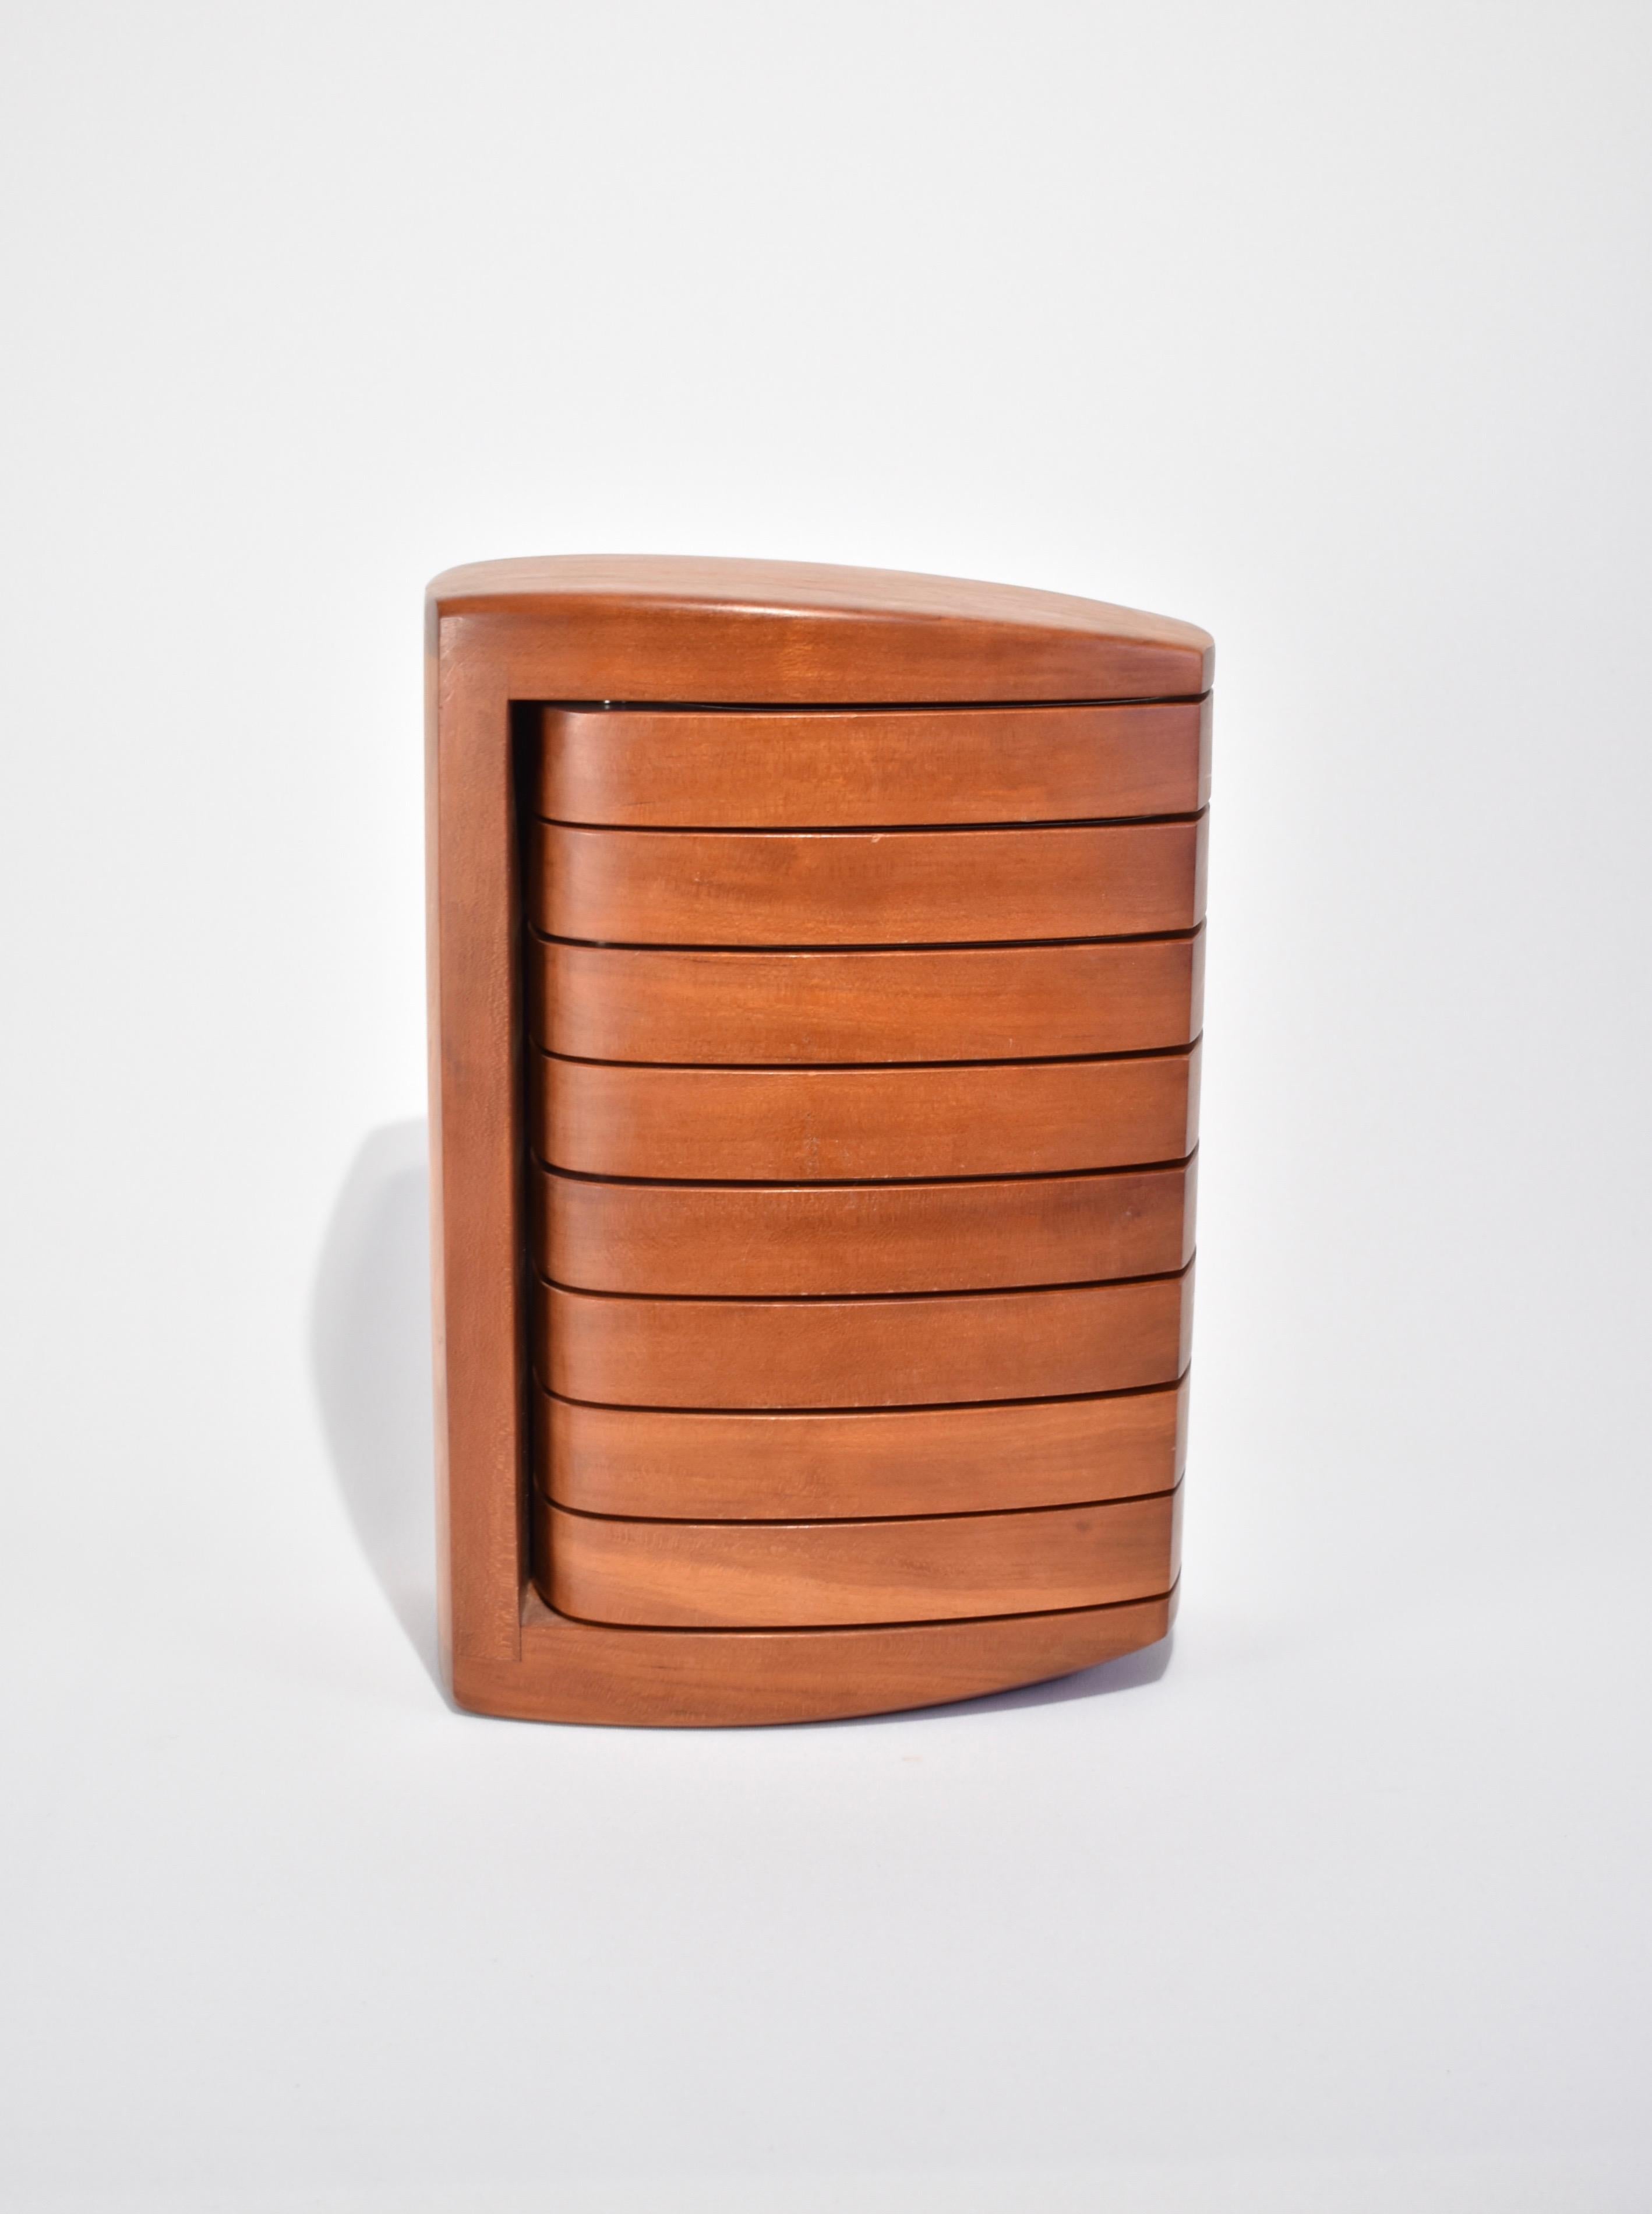 Stunning, sculptural wooden jewelry box with eight pivoting compartments lined in grey velvet. By Kellam studio, signed on base.